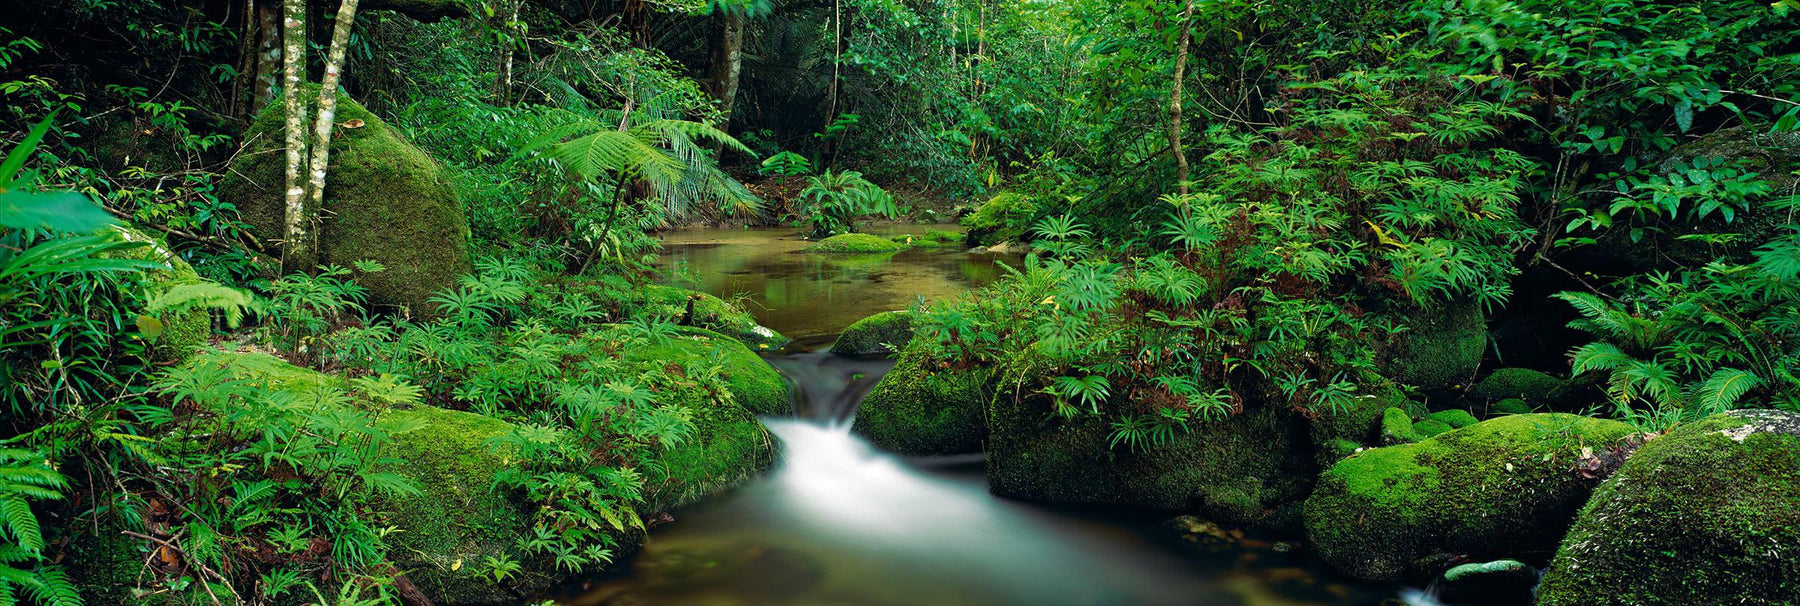 Creek with mossy boulders running through the tropical rainforest of Daintree National Park Australia